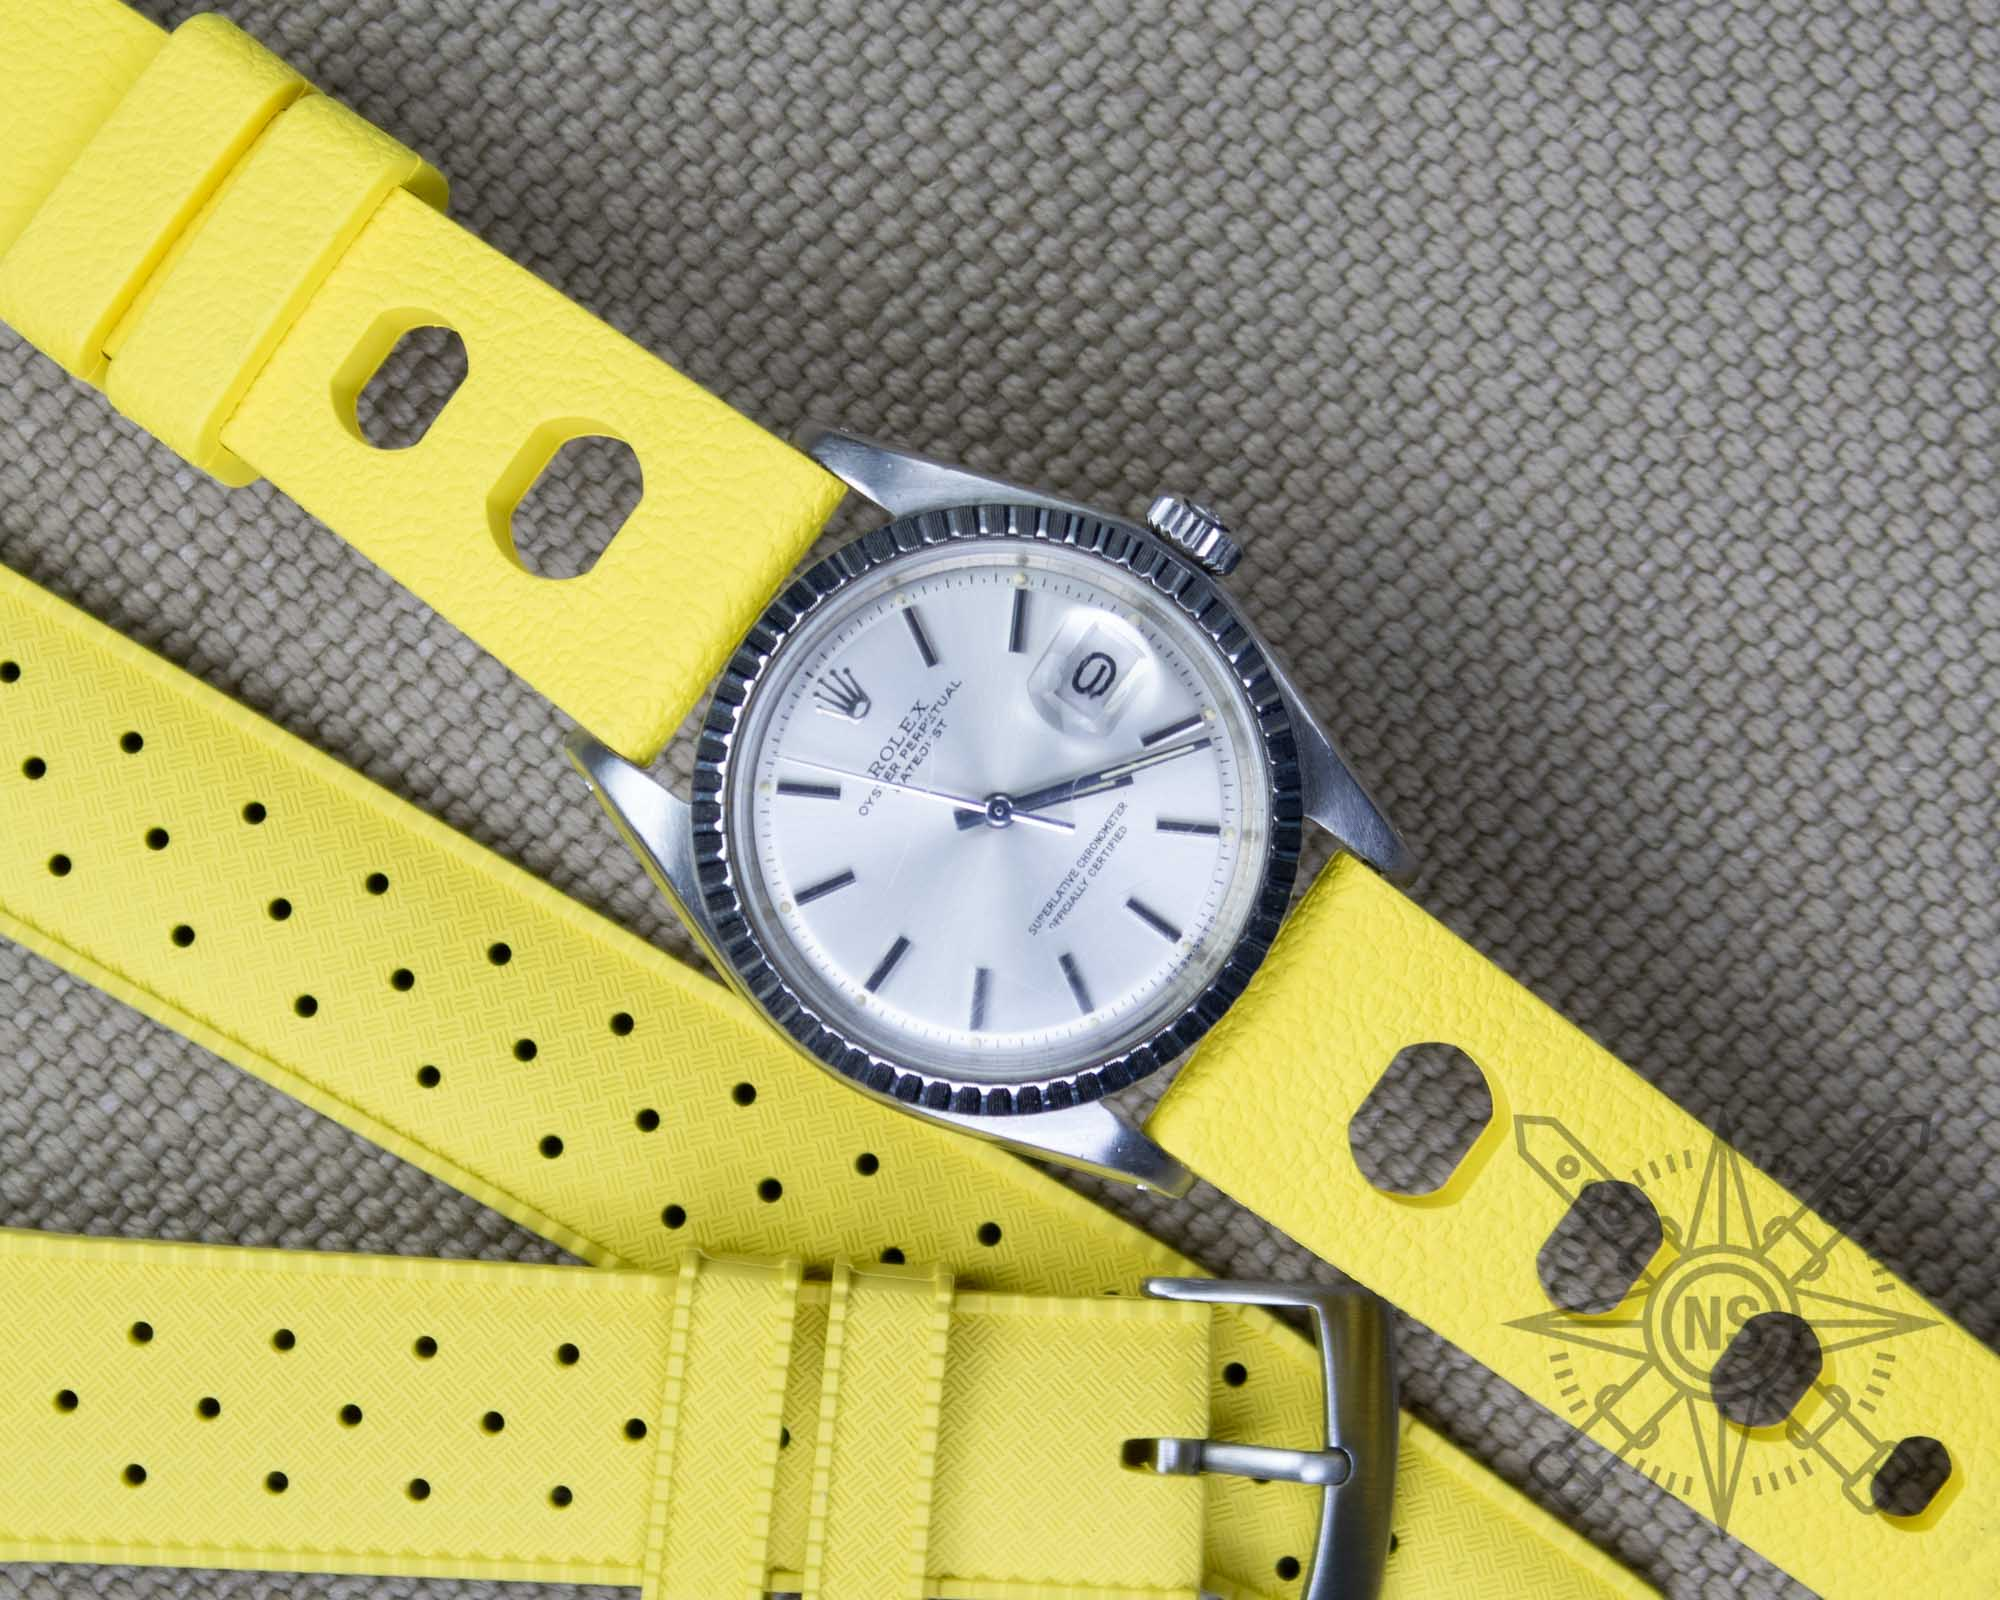 Caring for a Tropic watch strap